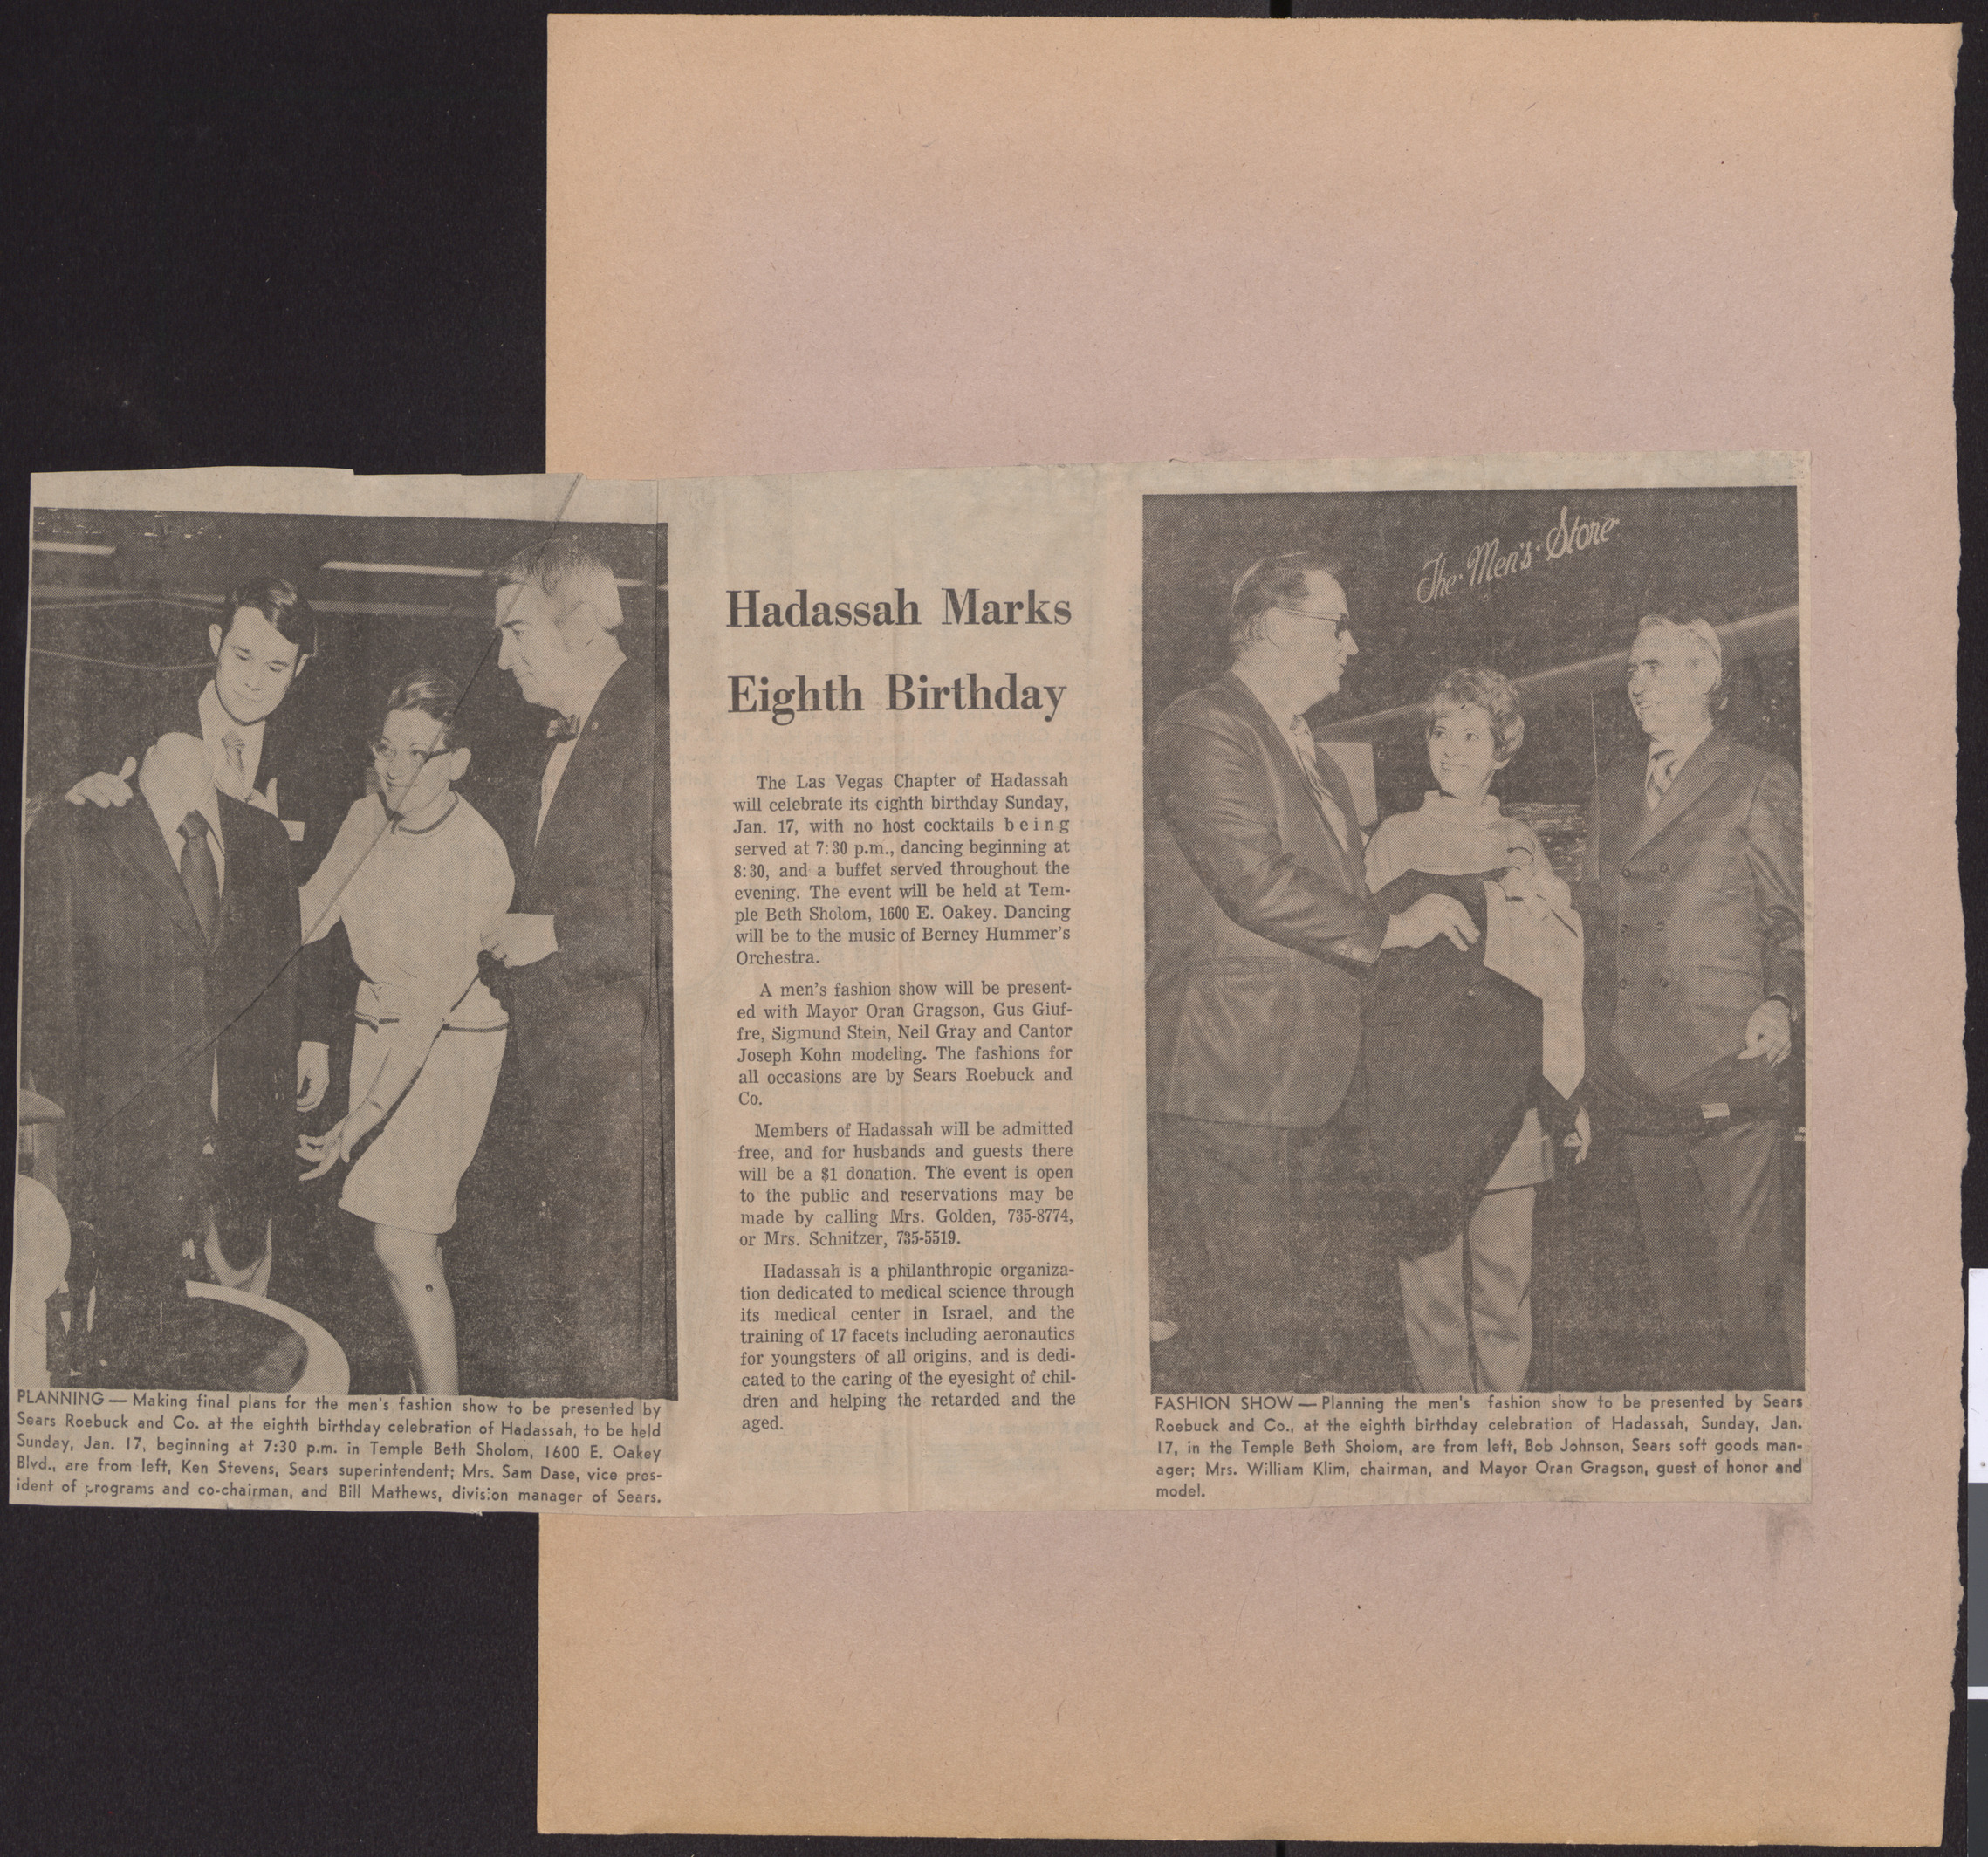 Newspaper clipping, Hadassah Marks Eighth Birthday, publication and date unknown